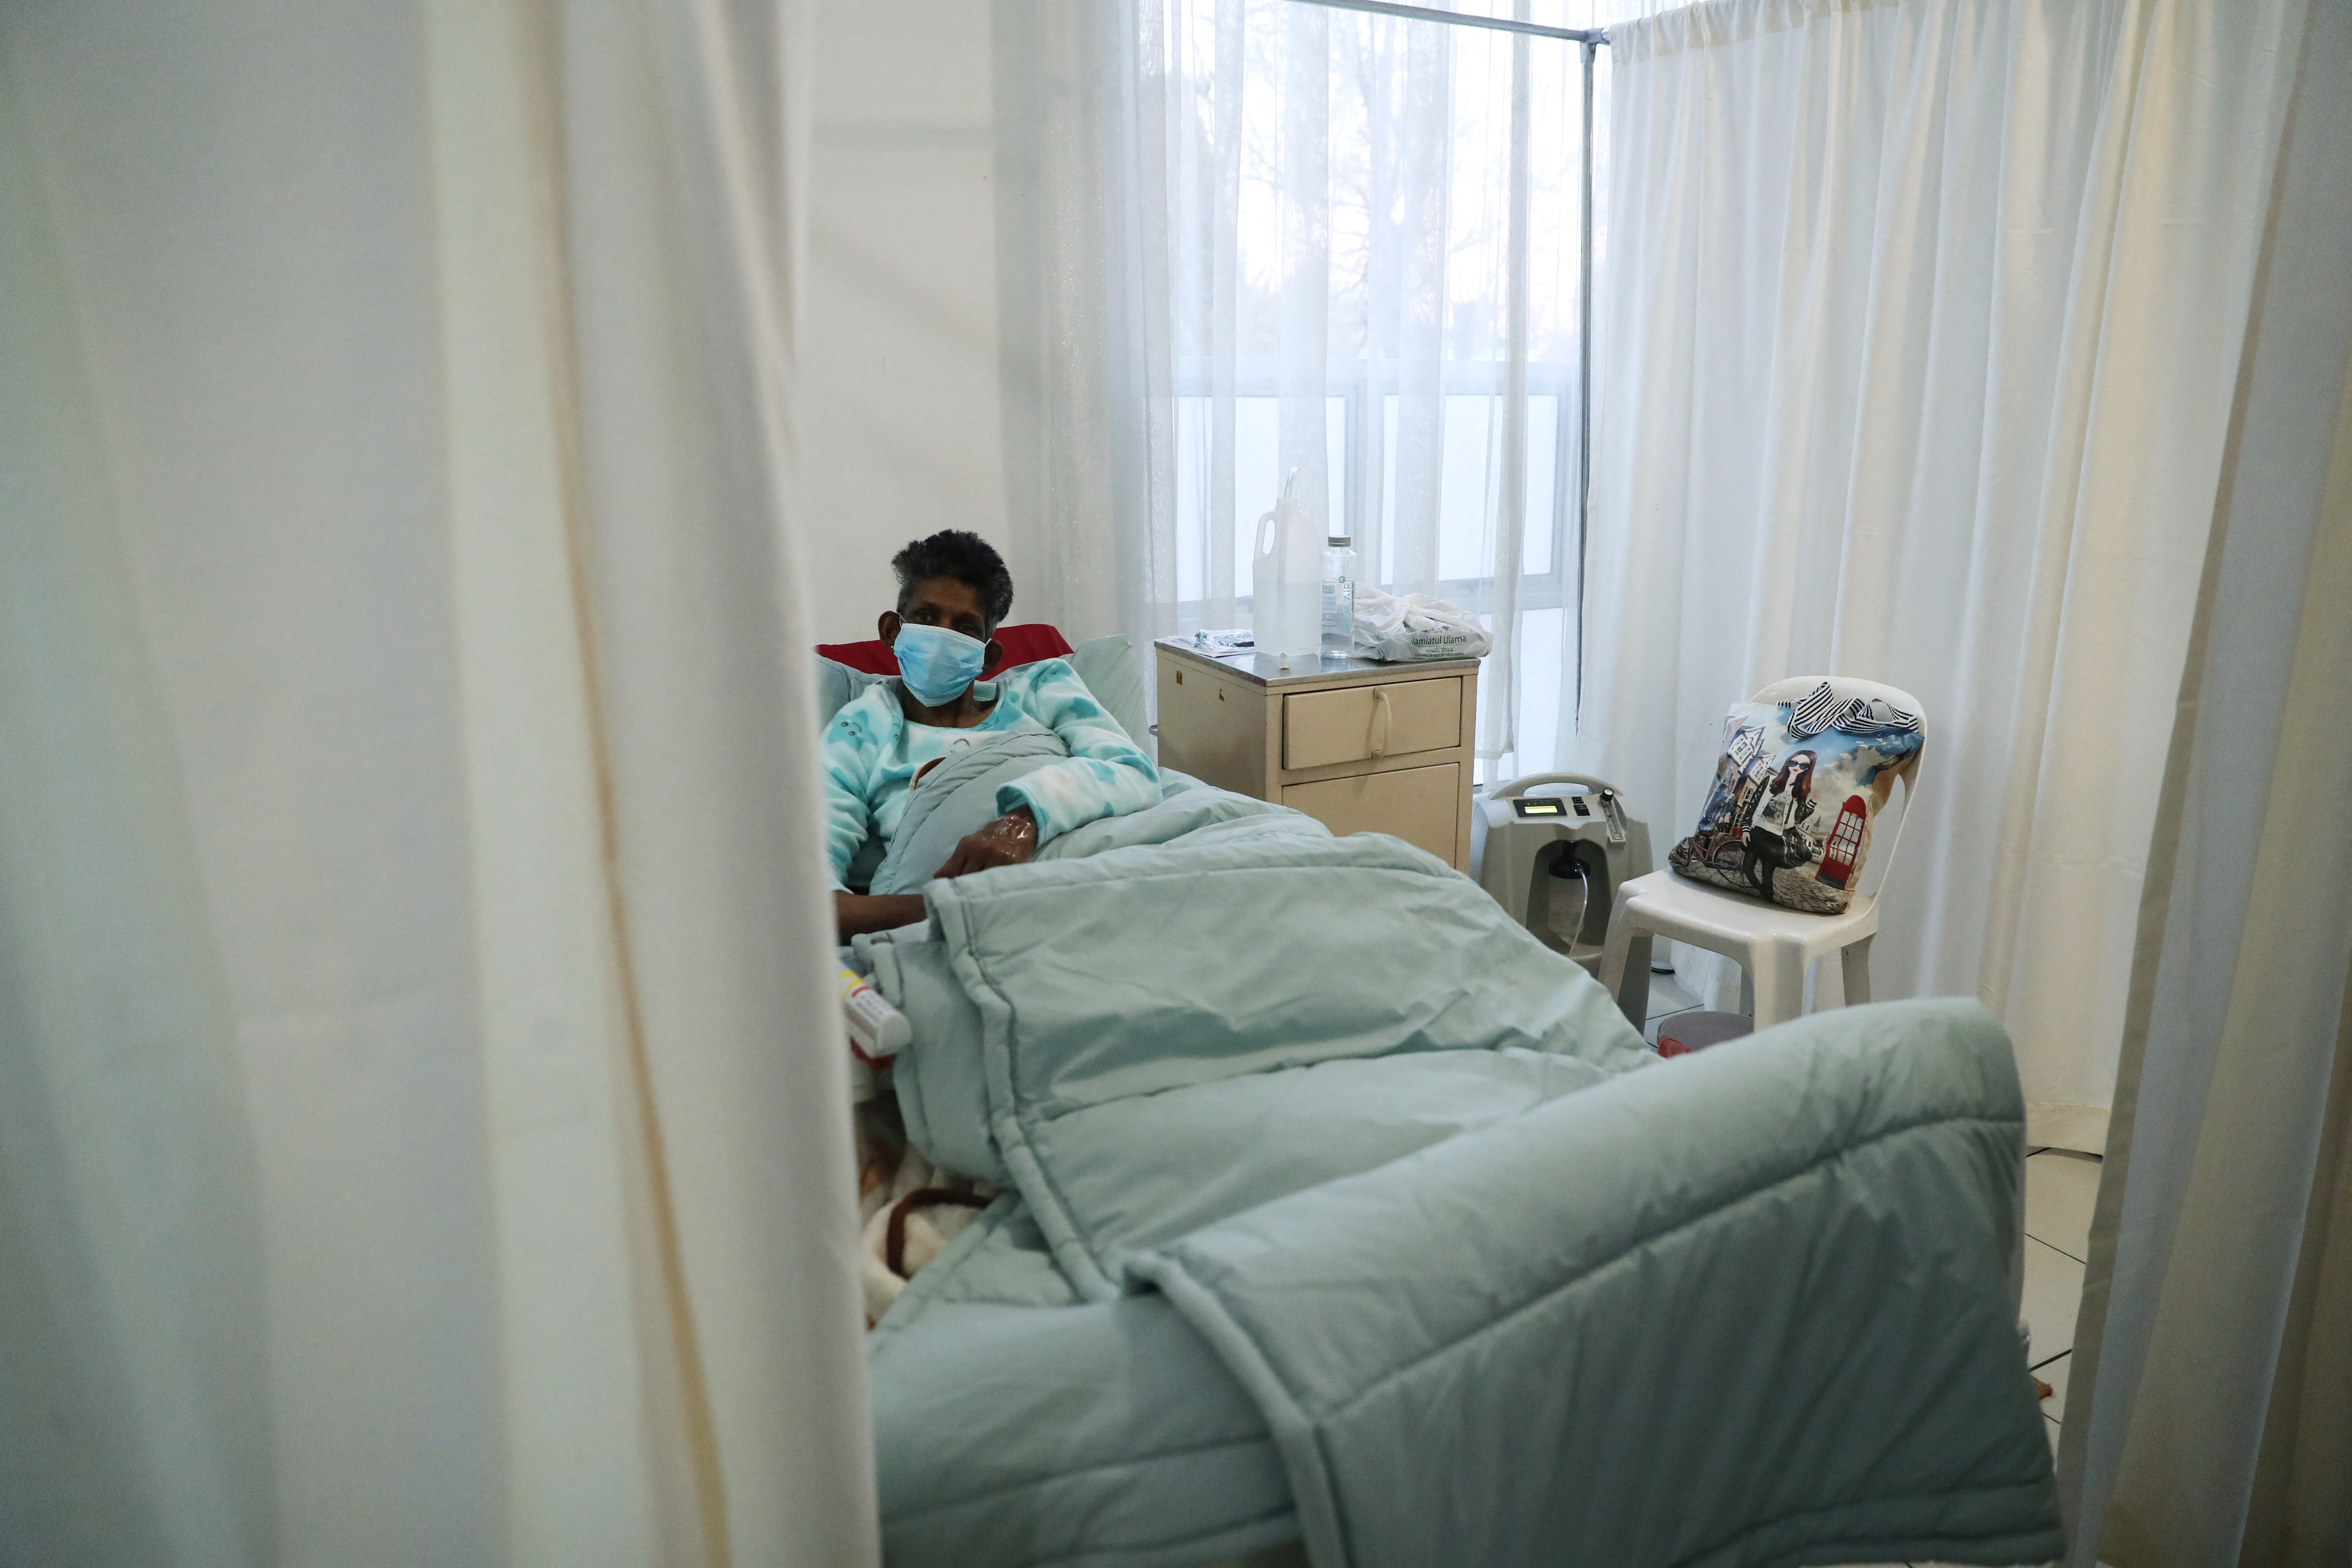 A patient being treated at a makeshift hospital run by charity organisation The Gift of the Givers, during the coronavirus disease (COVID-19) outbreak in Johannesburg